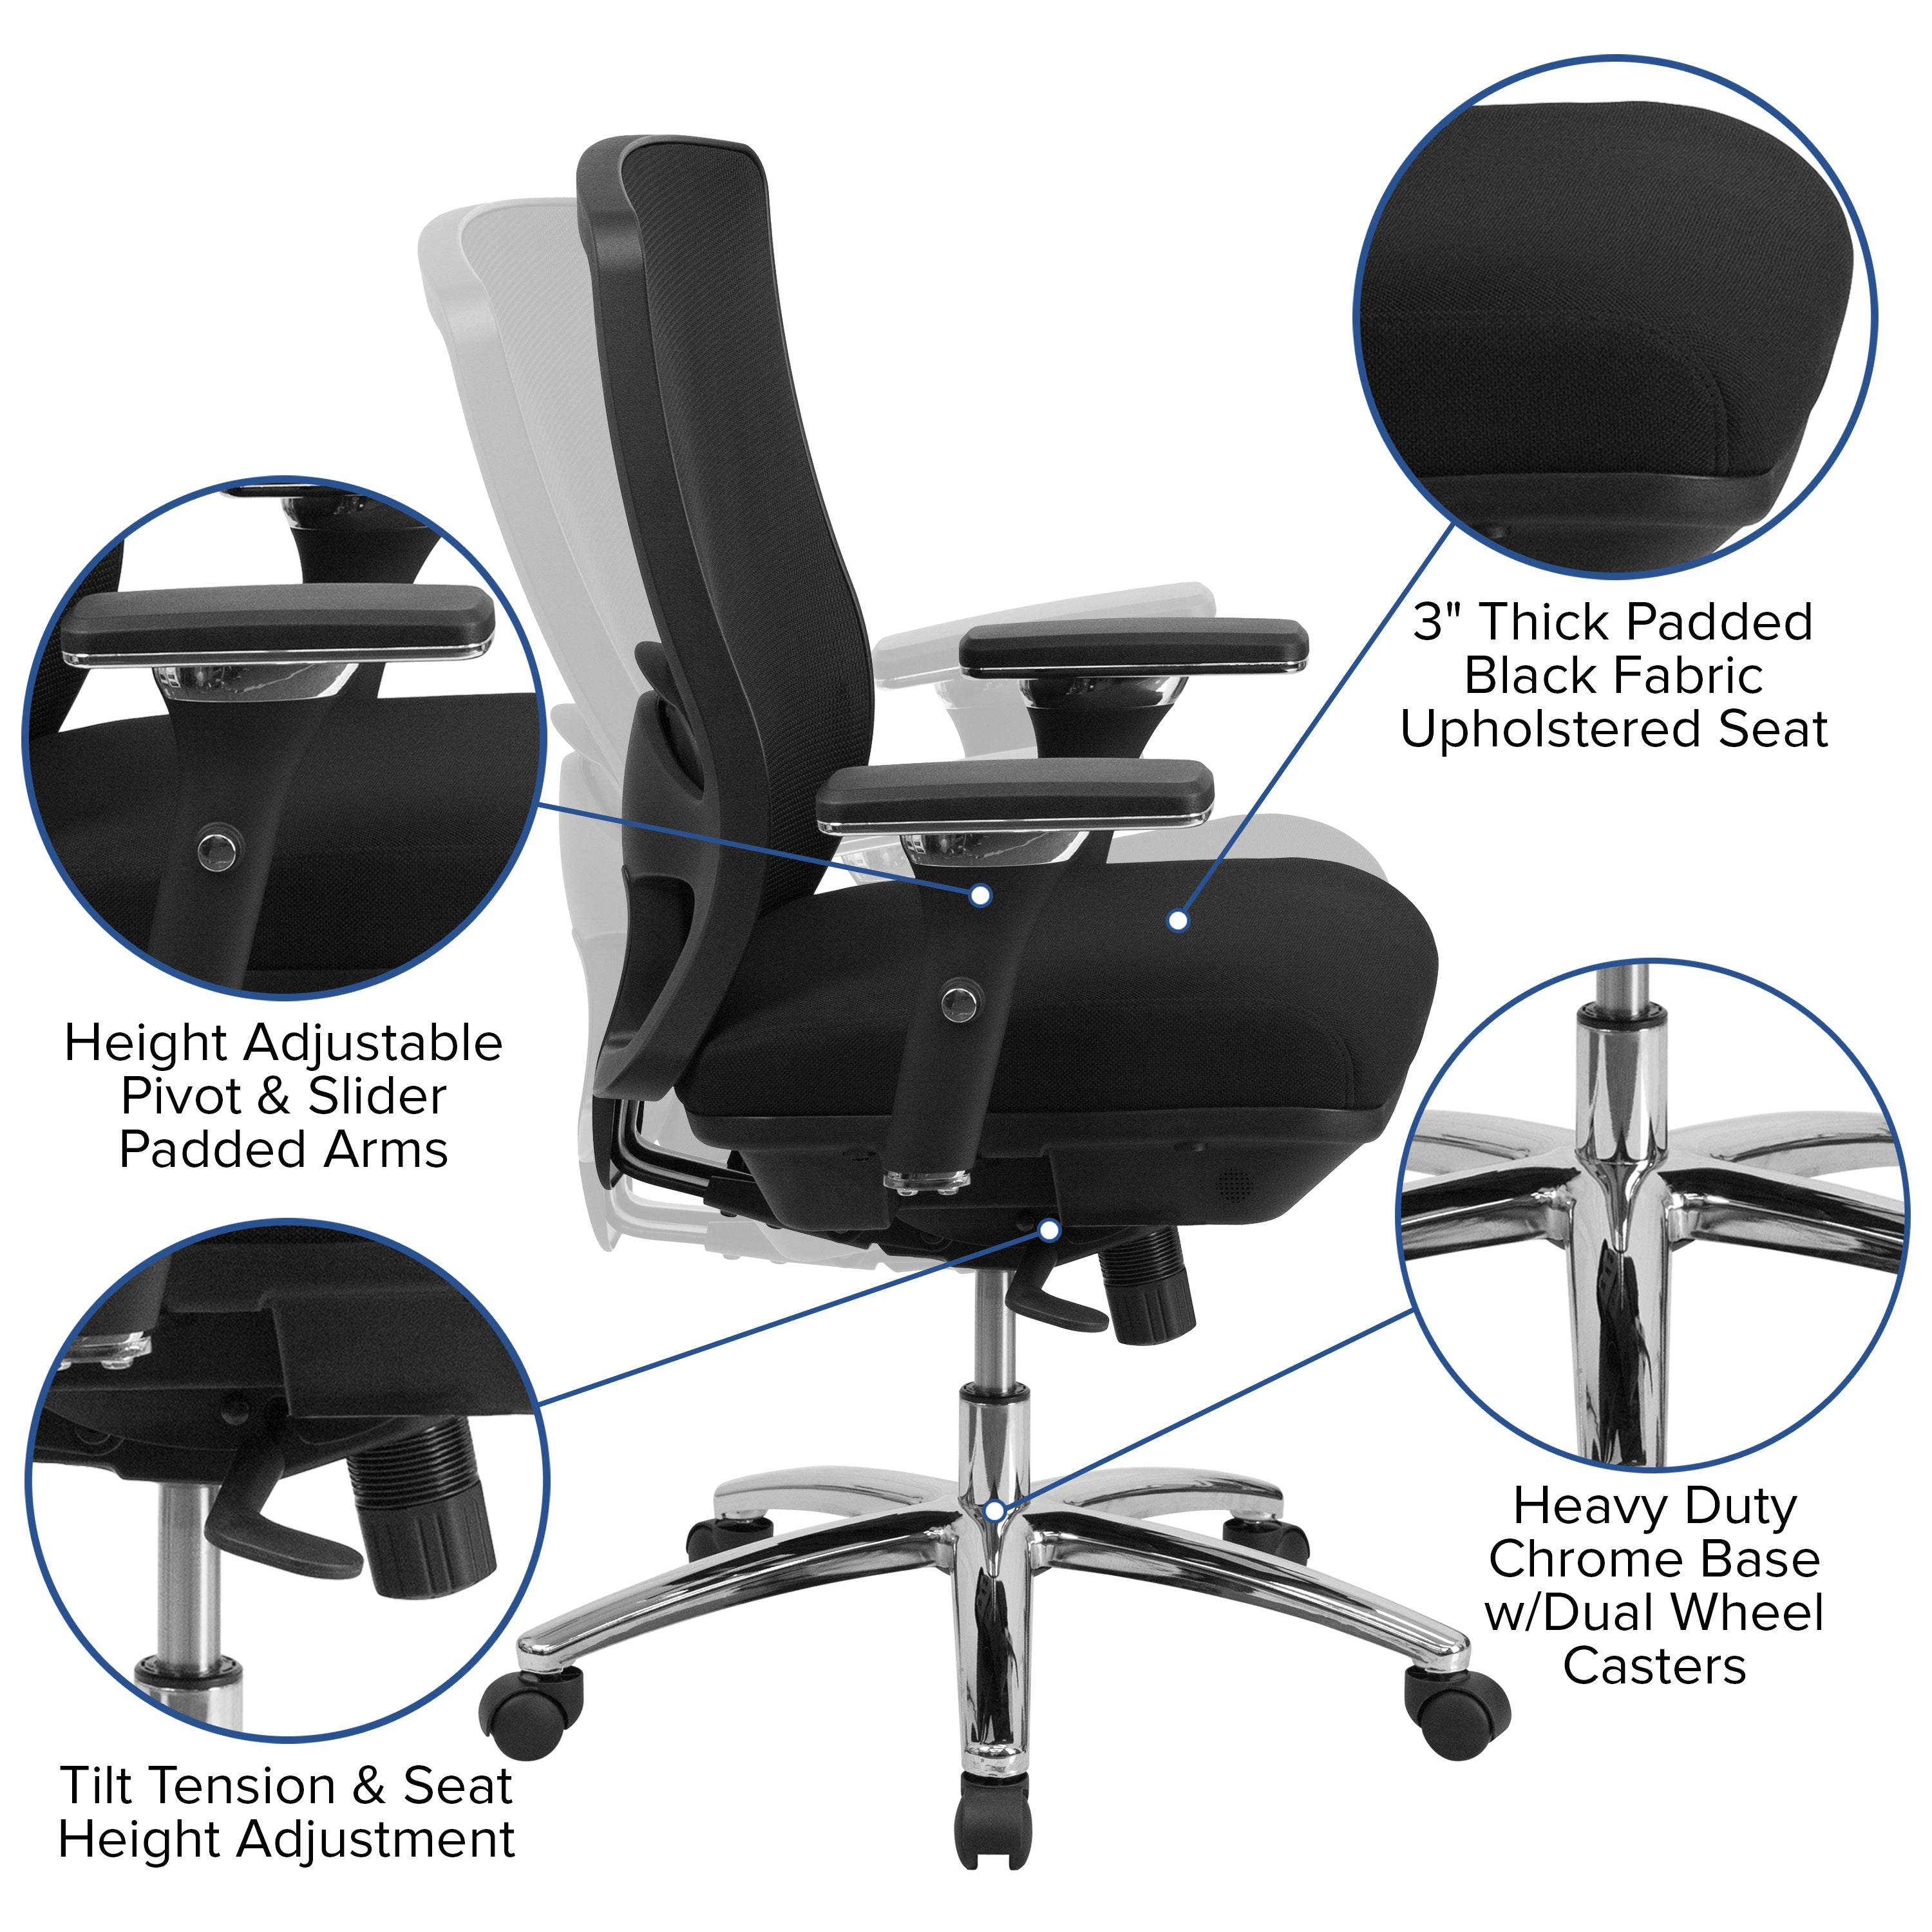 HERCULES Series 24/7 Intensive Use Big & Tall 350 lb. Rated Mesh Multifunction Swivel Ergonomic Office Chair with Synchro-Tilt-Big & Tall Office Chair-Flash Furniture-Wall2Wall Furnishings